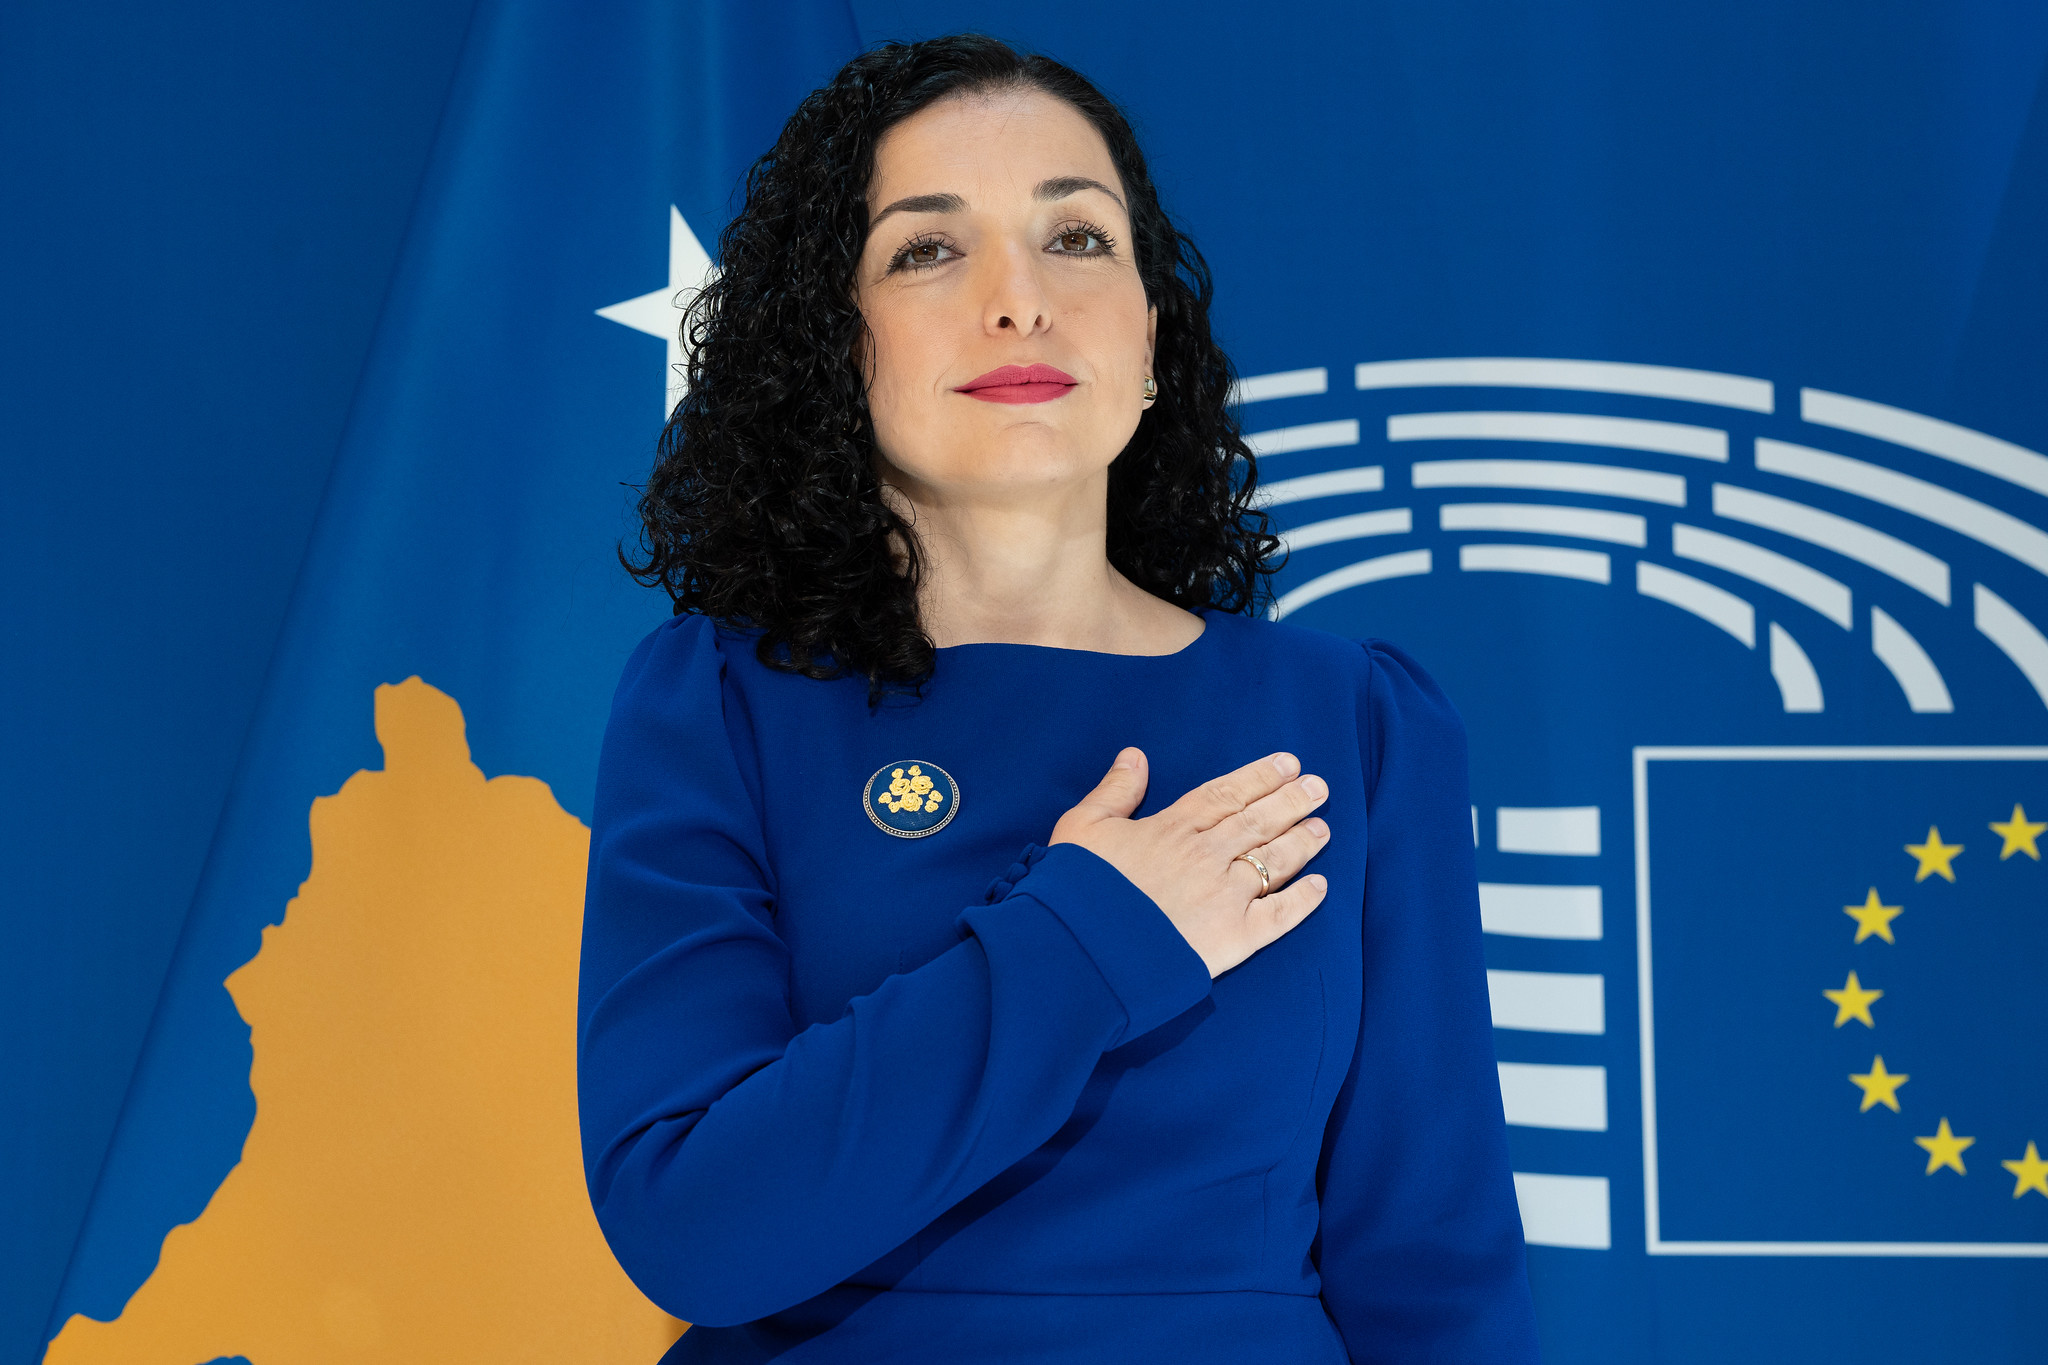 President of the Republic of Kosovo, Vjosa Osmani, addresses the European Parliament in a formal sitting in Strasbourg on 22 July 2022. © European Union 2023 – Source: EP via Flickr.